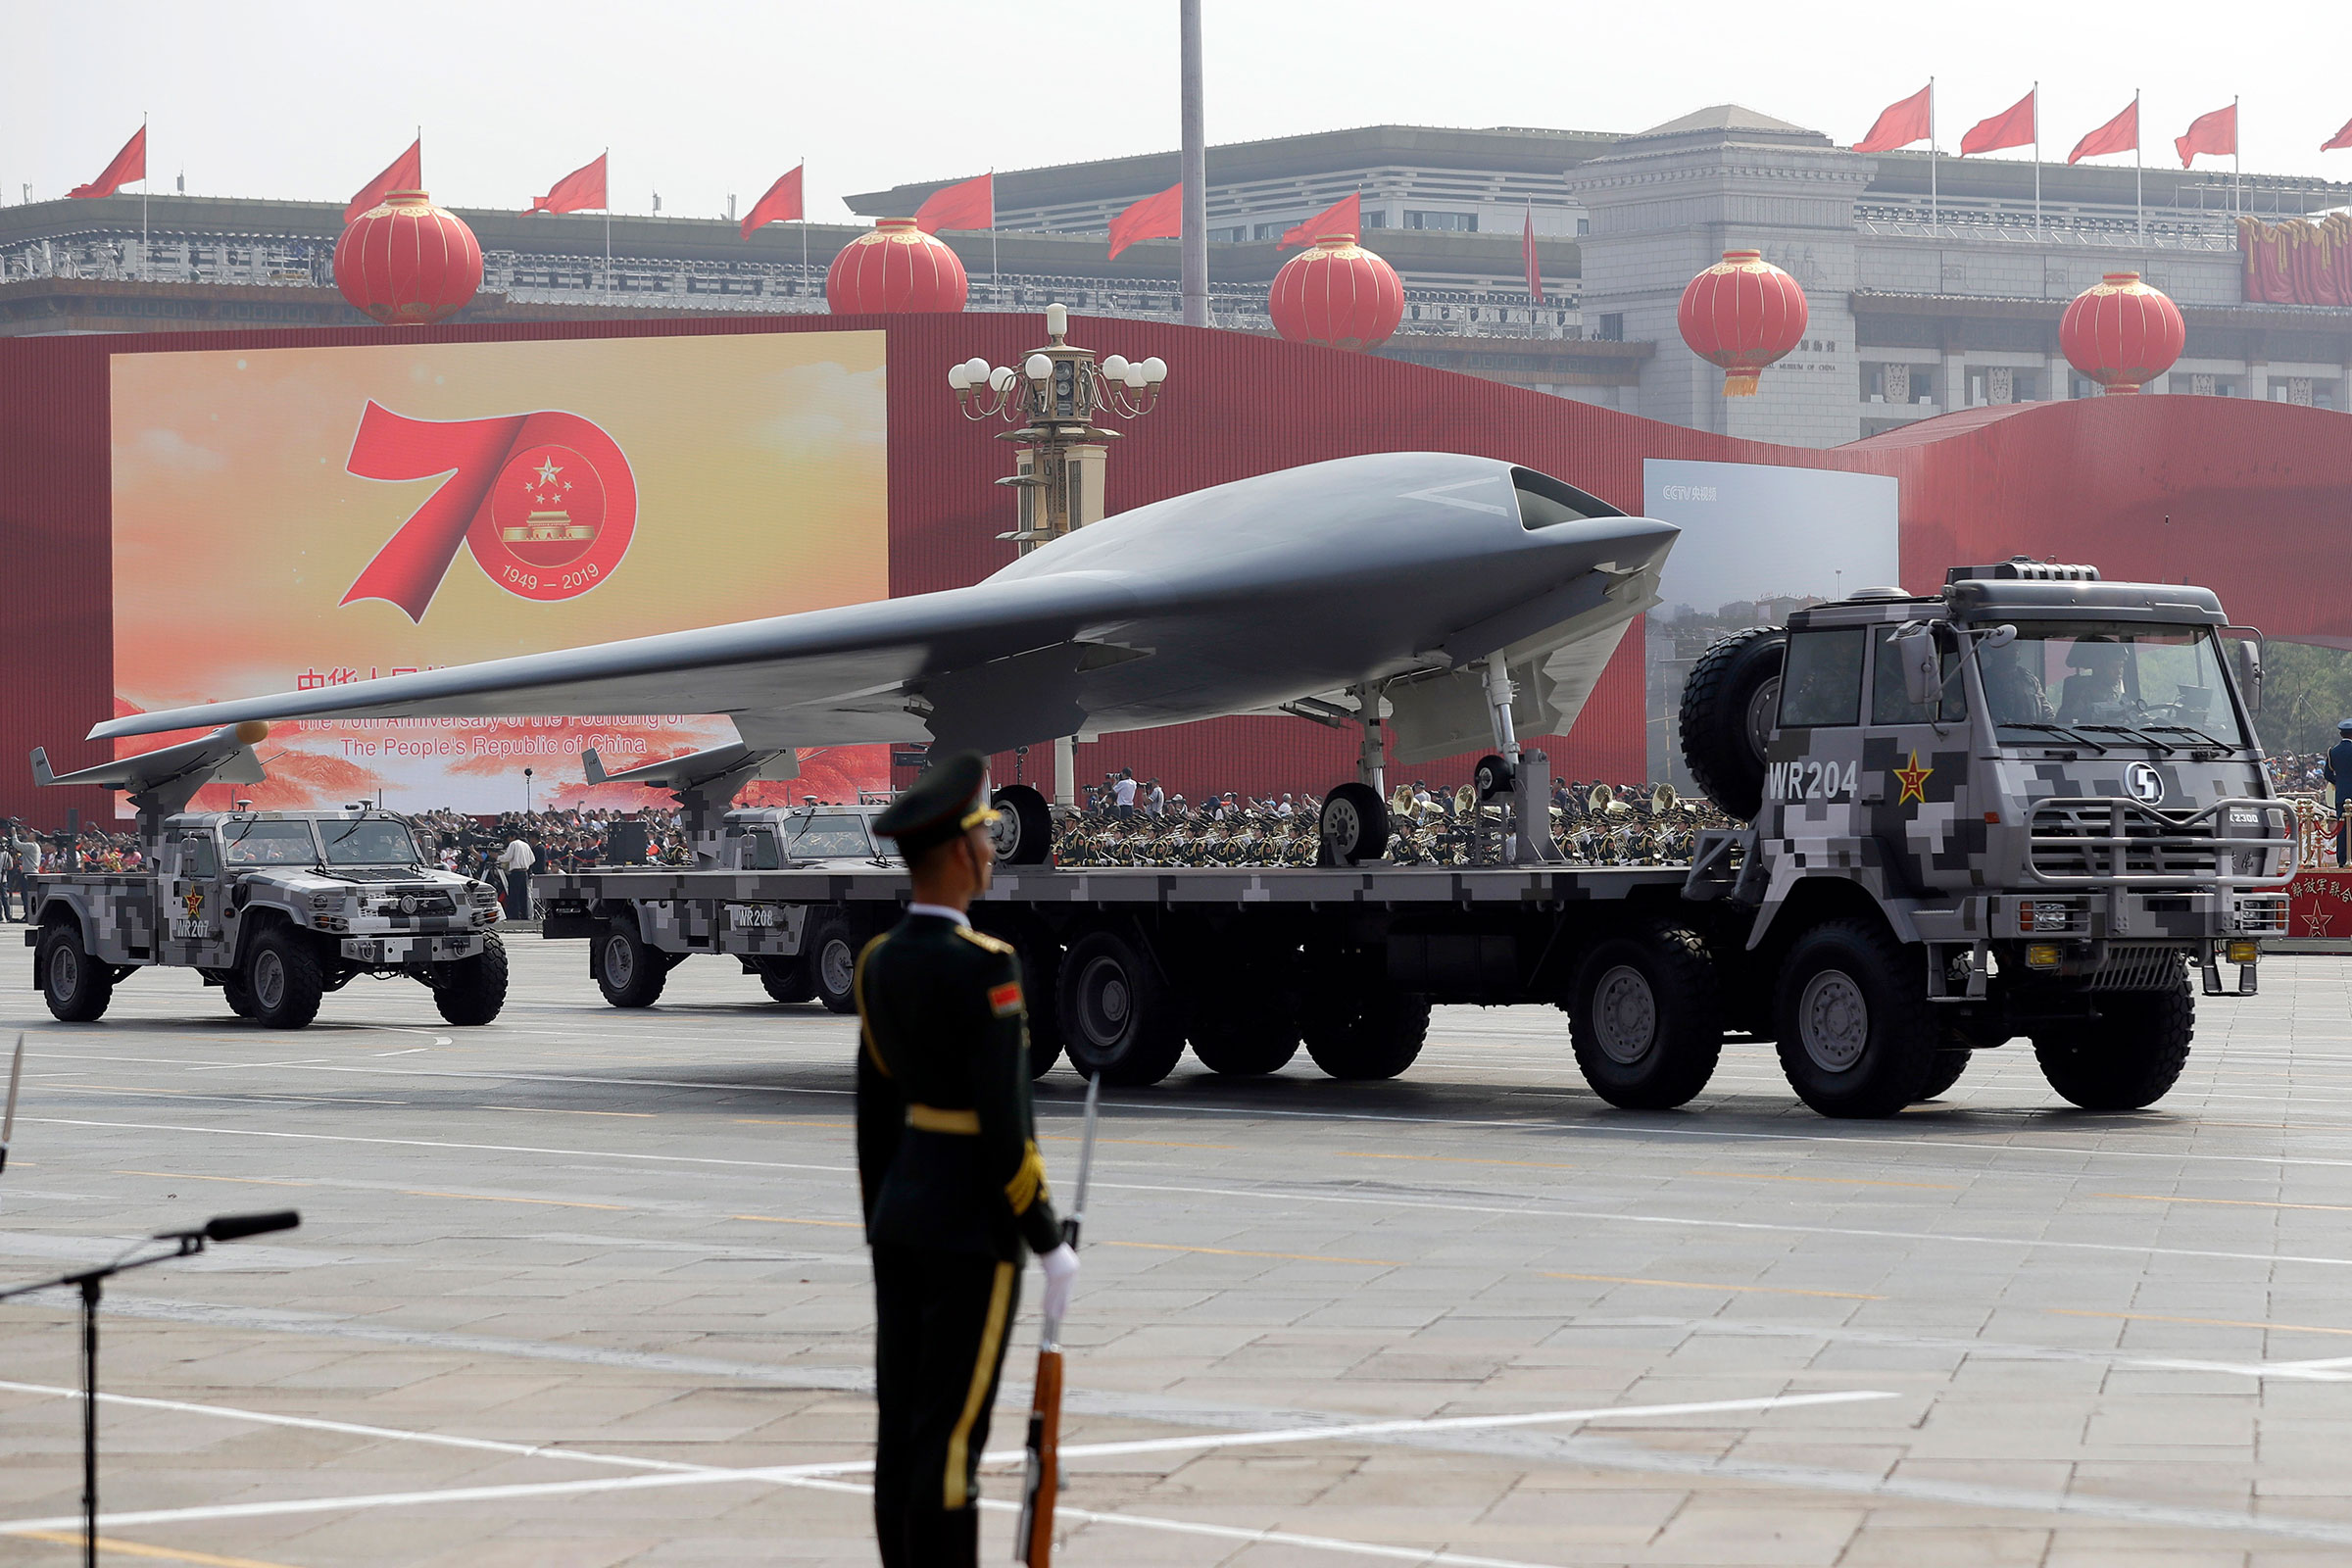 Trucks carrying weapons rumbled through Beijing as the Communist Party celebrated its 70th anniversary in power in Beijing, Tuesday, Oct. 1, 2019. (Copyright 2019 The Associated Press. All rights reserved)